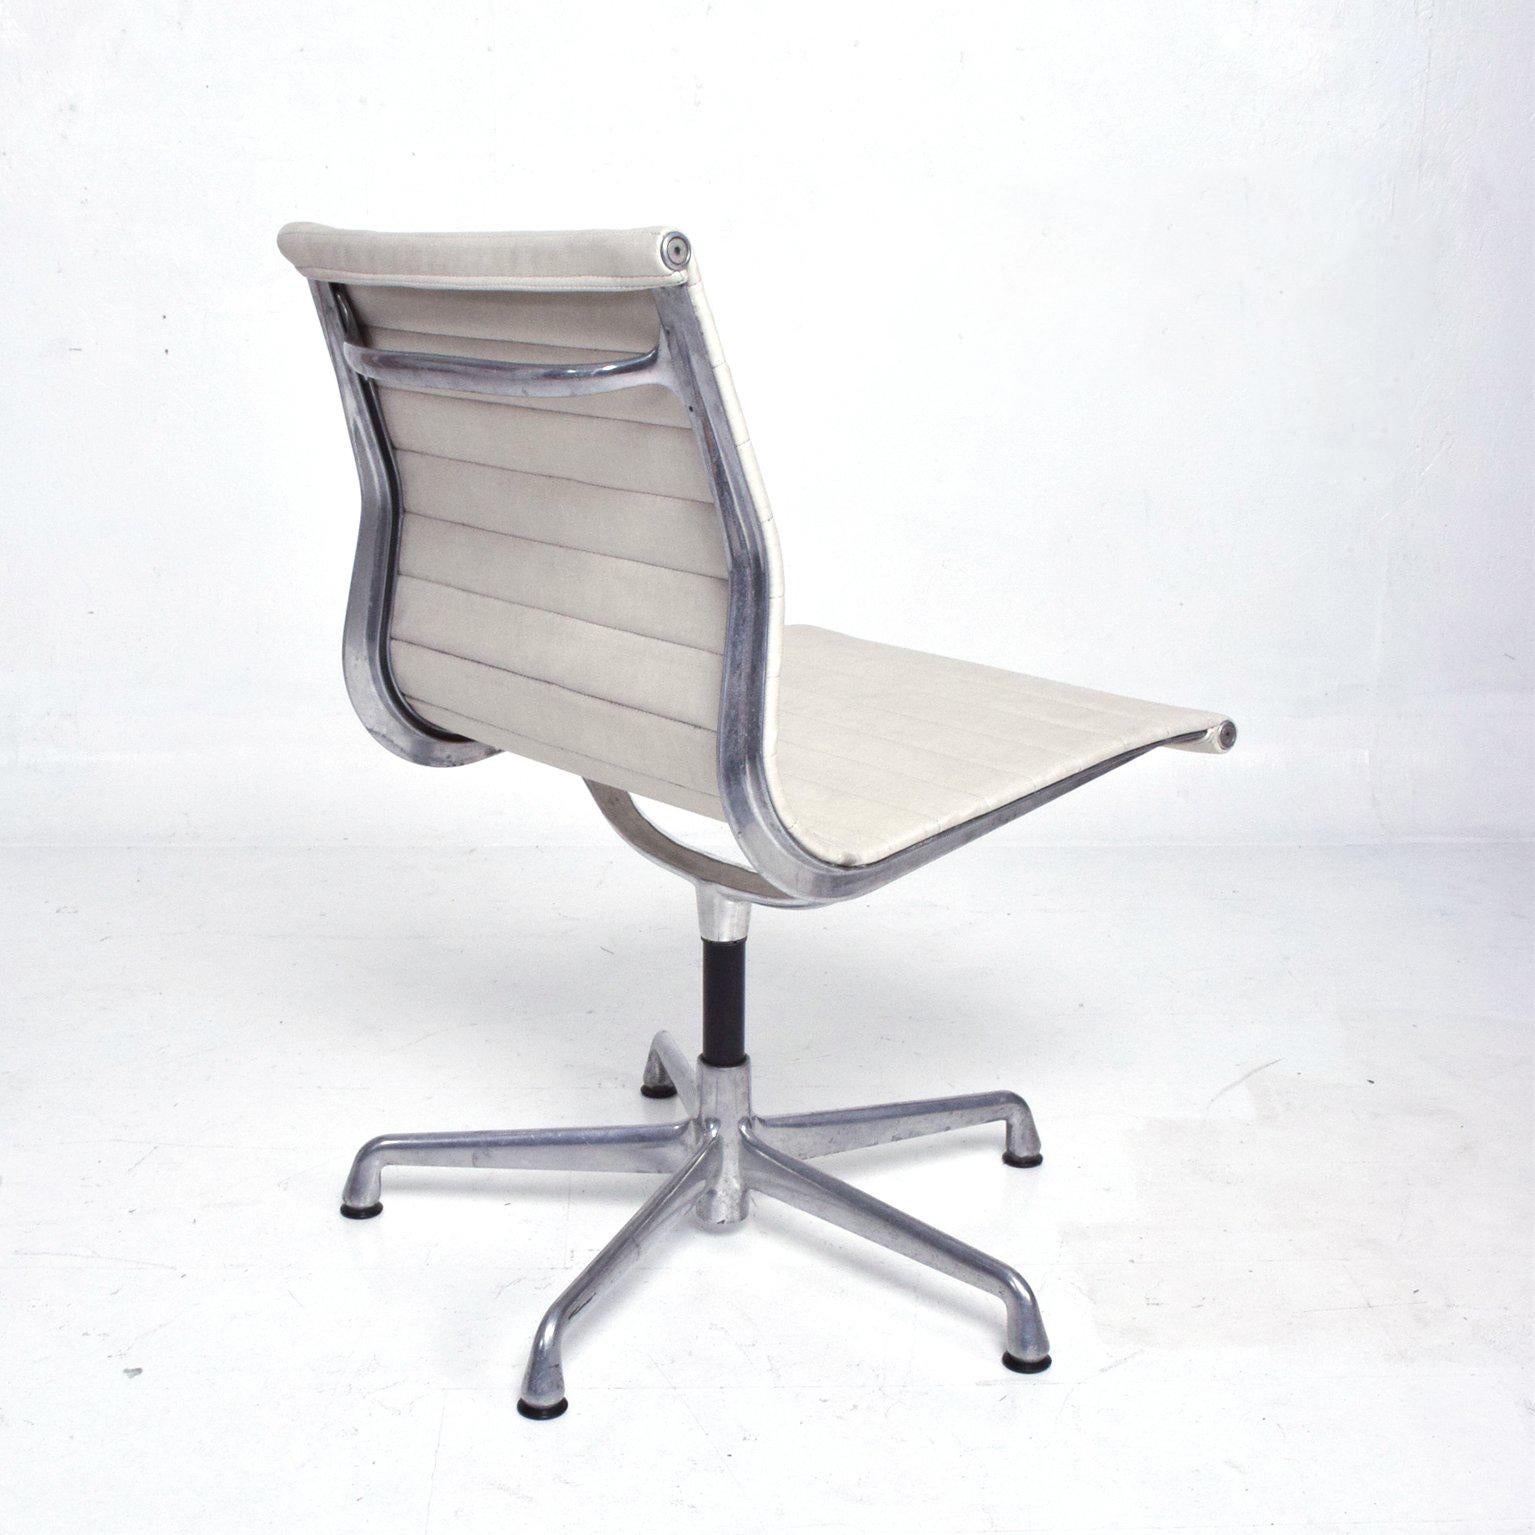 Mid-20th Century Early Aluminum Group Herman Miller Eames Chairs with Five-Star Base